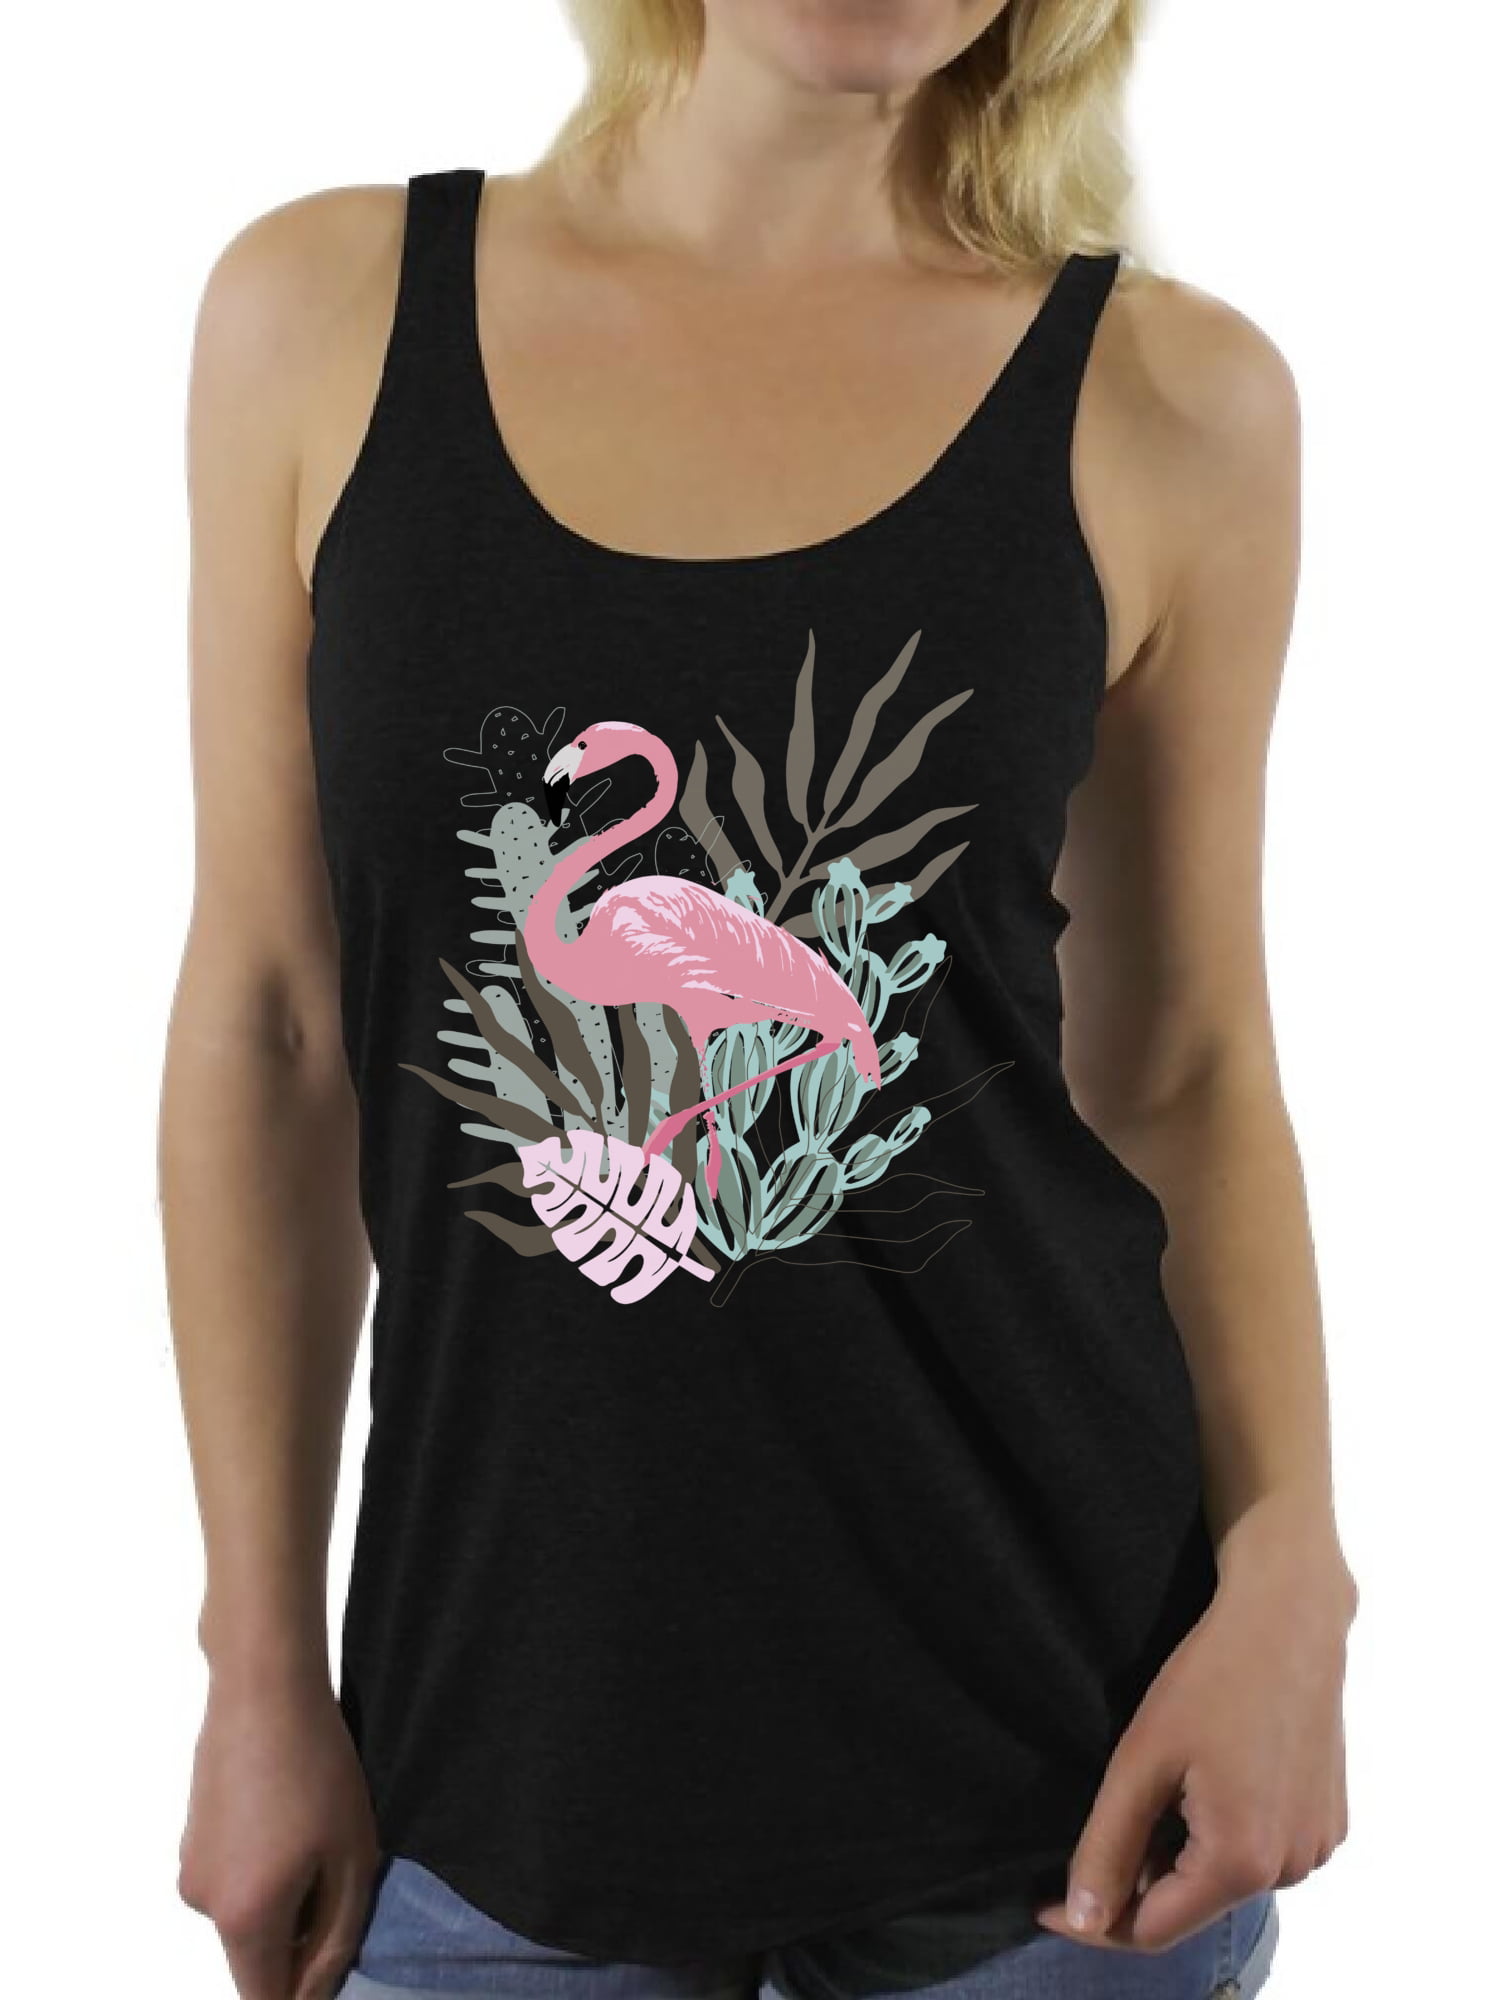 Awkward Styles Floral Flamingo Racerback Tank Top T-Shirt for Her ...